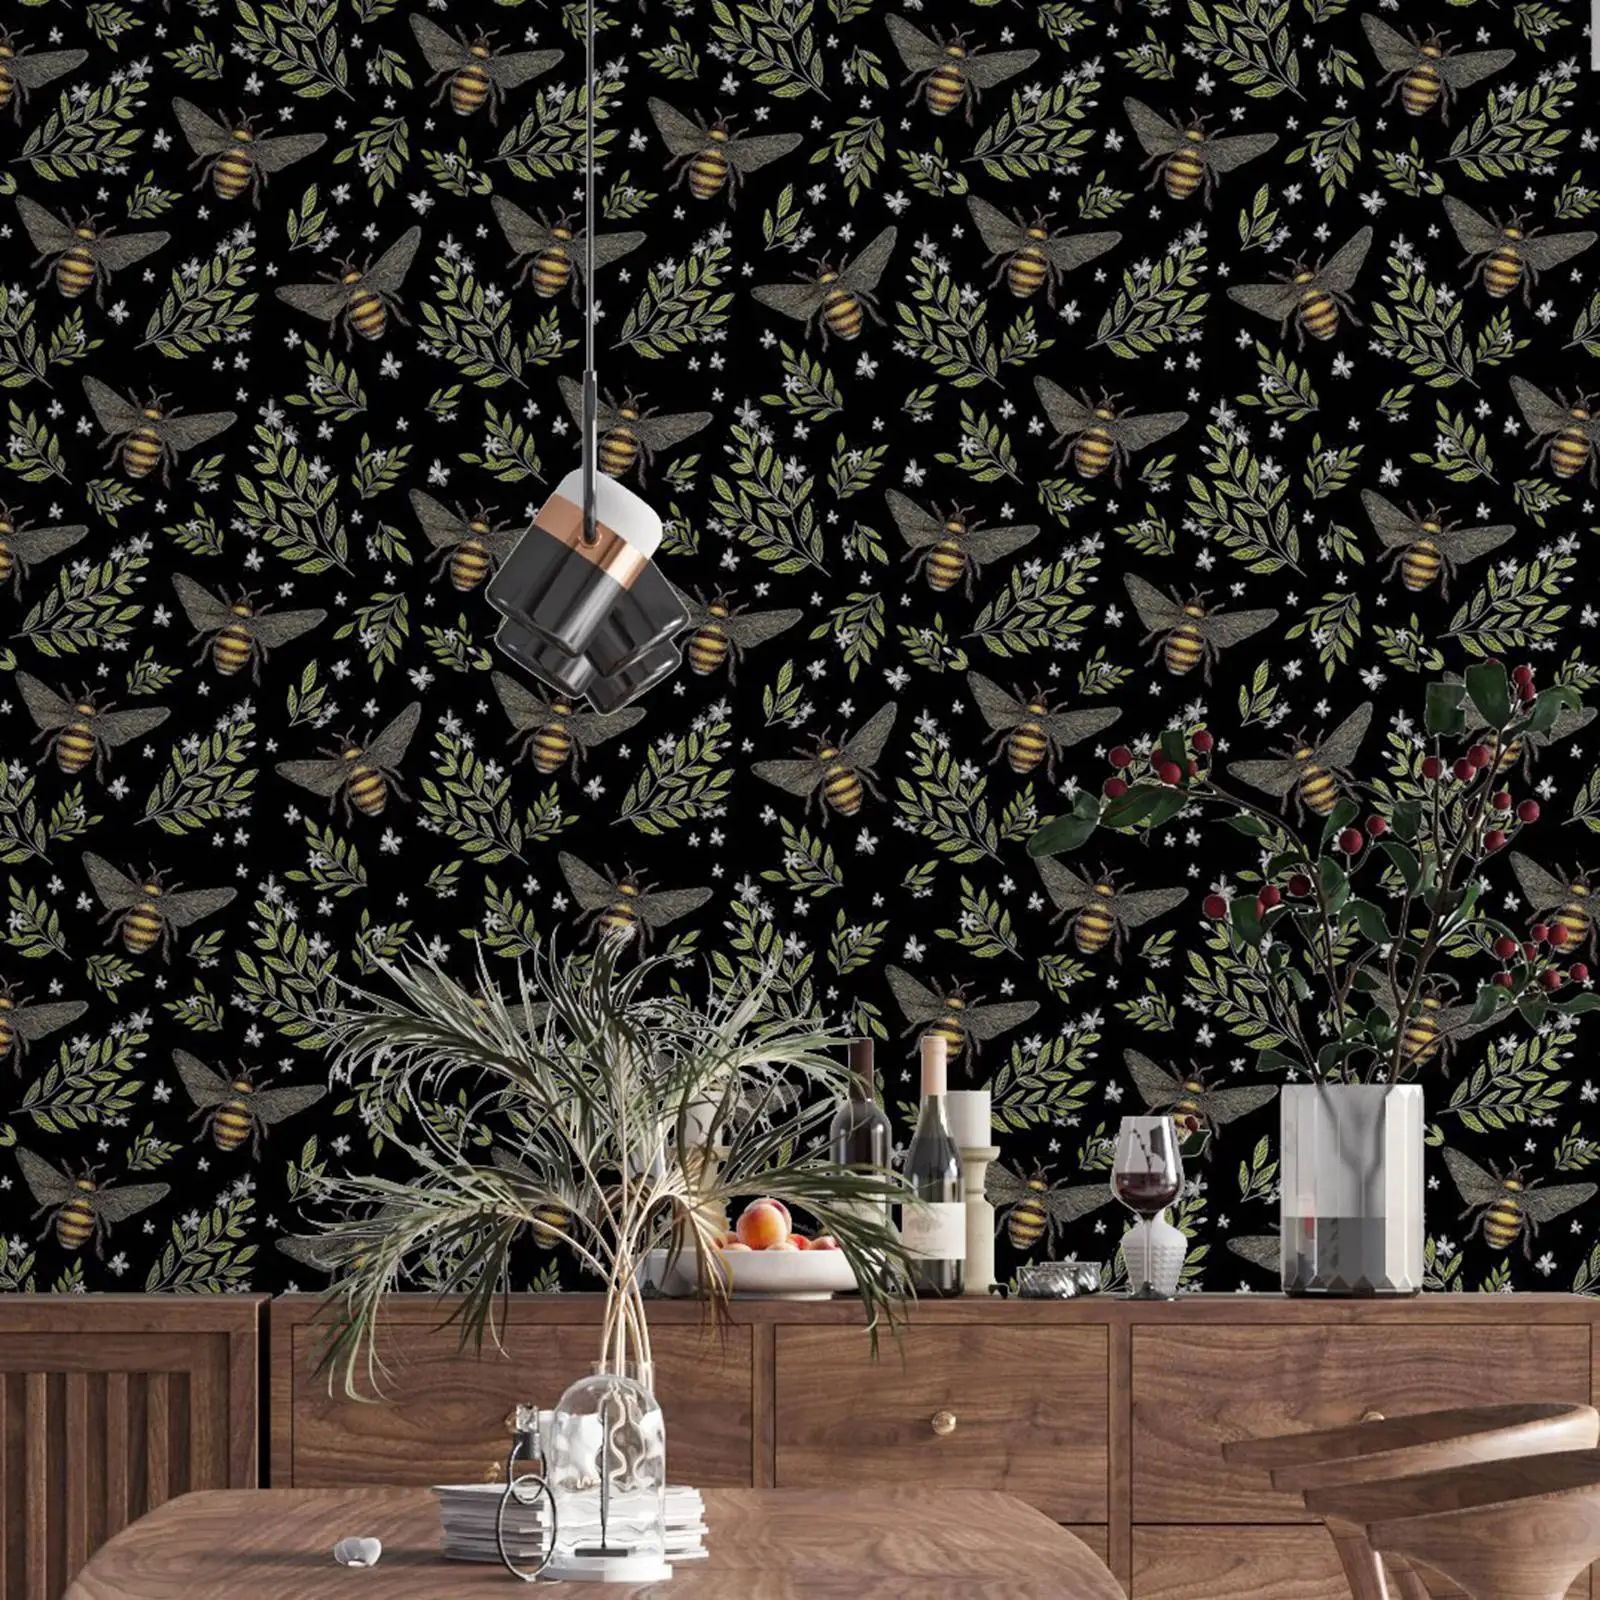 Spring Bee Removable Wallpaper in Midnight Black, Honey Bee Wall Paper in black back ground for living room bedroom HB0624001 сотовый телефон honor x6a 6 128gb midnight black